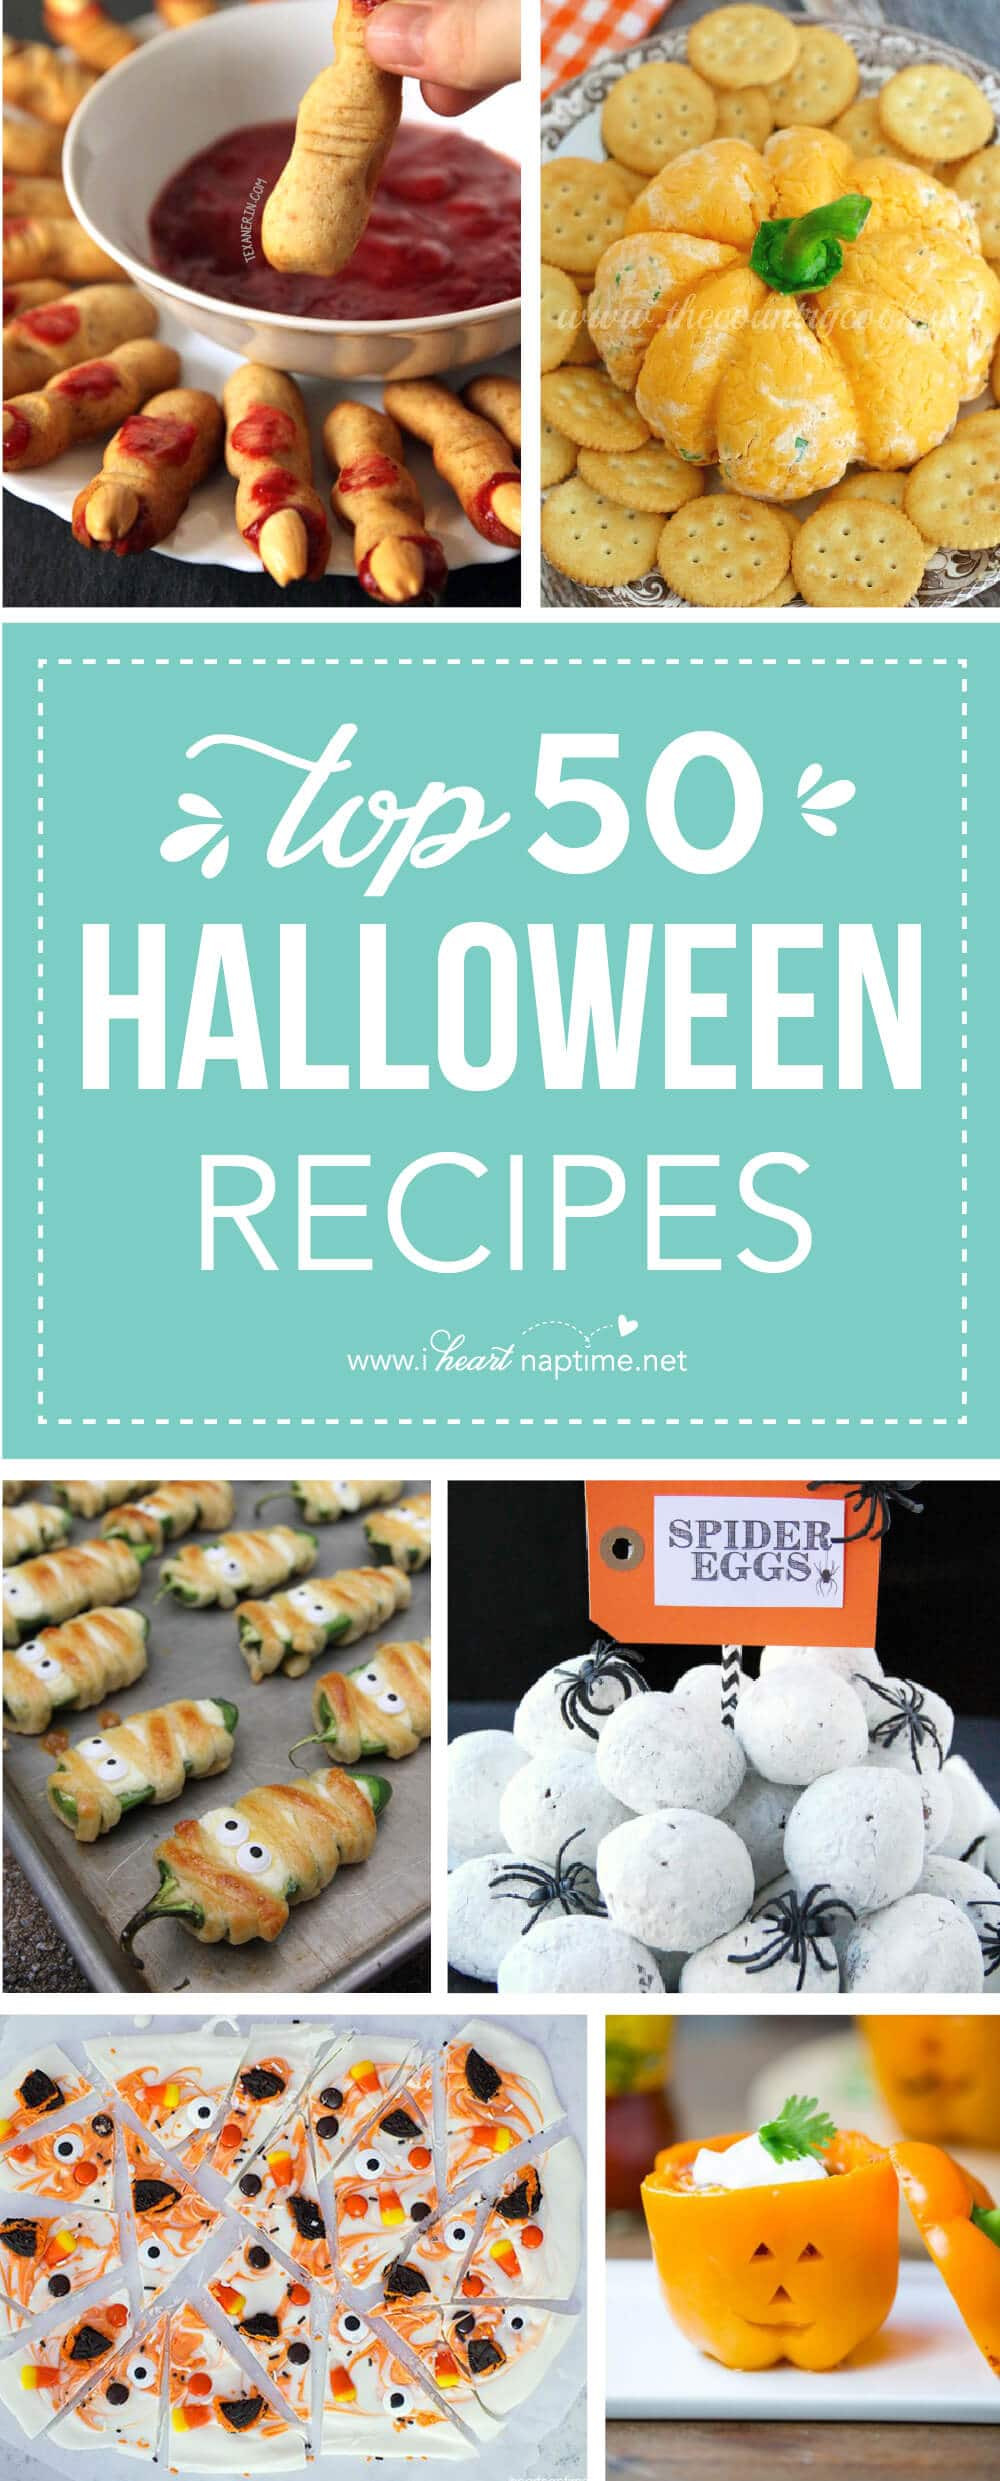 Halloween Side Dishes For Parties
 Top 50 Halloween Recipes I Heart Nap Time